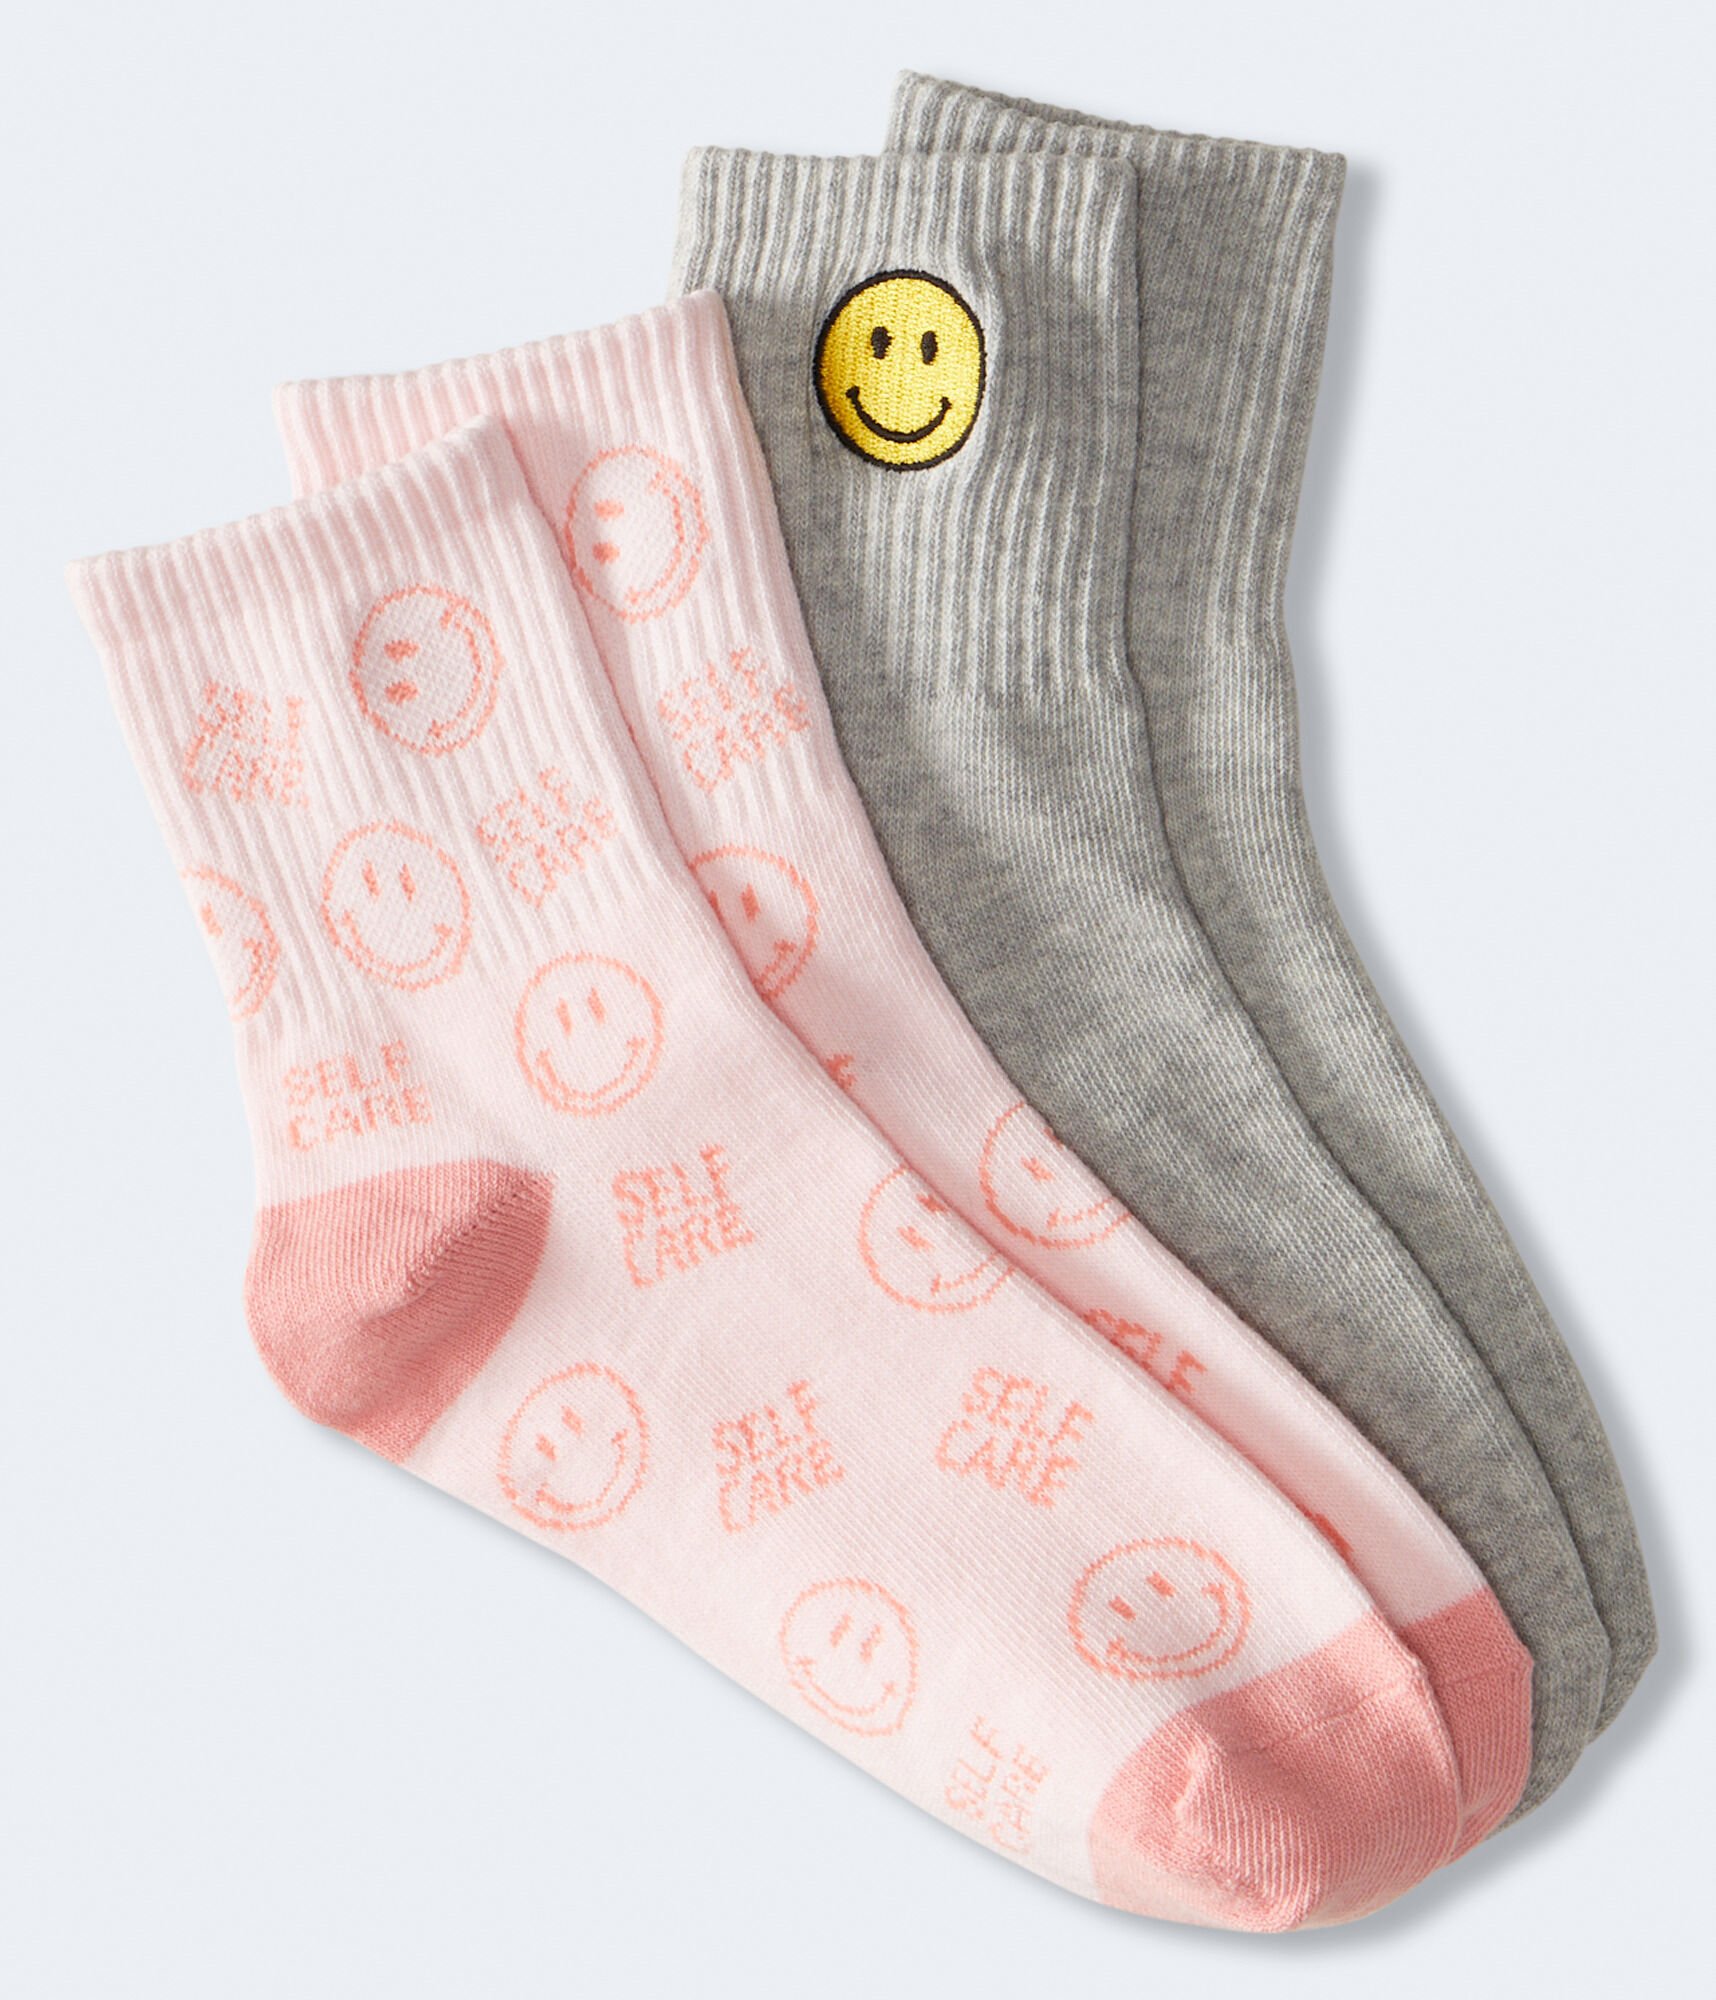 Smiley Faces Crew Sock 2-Pack